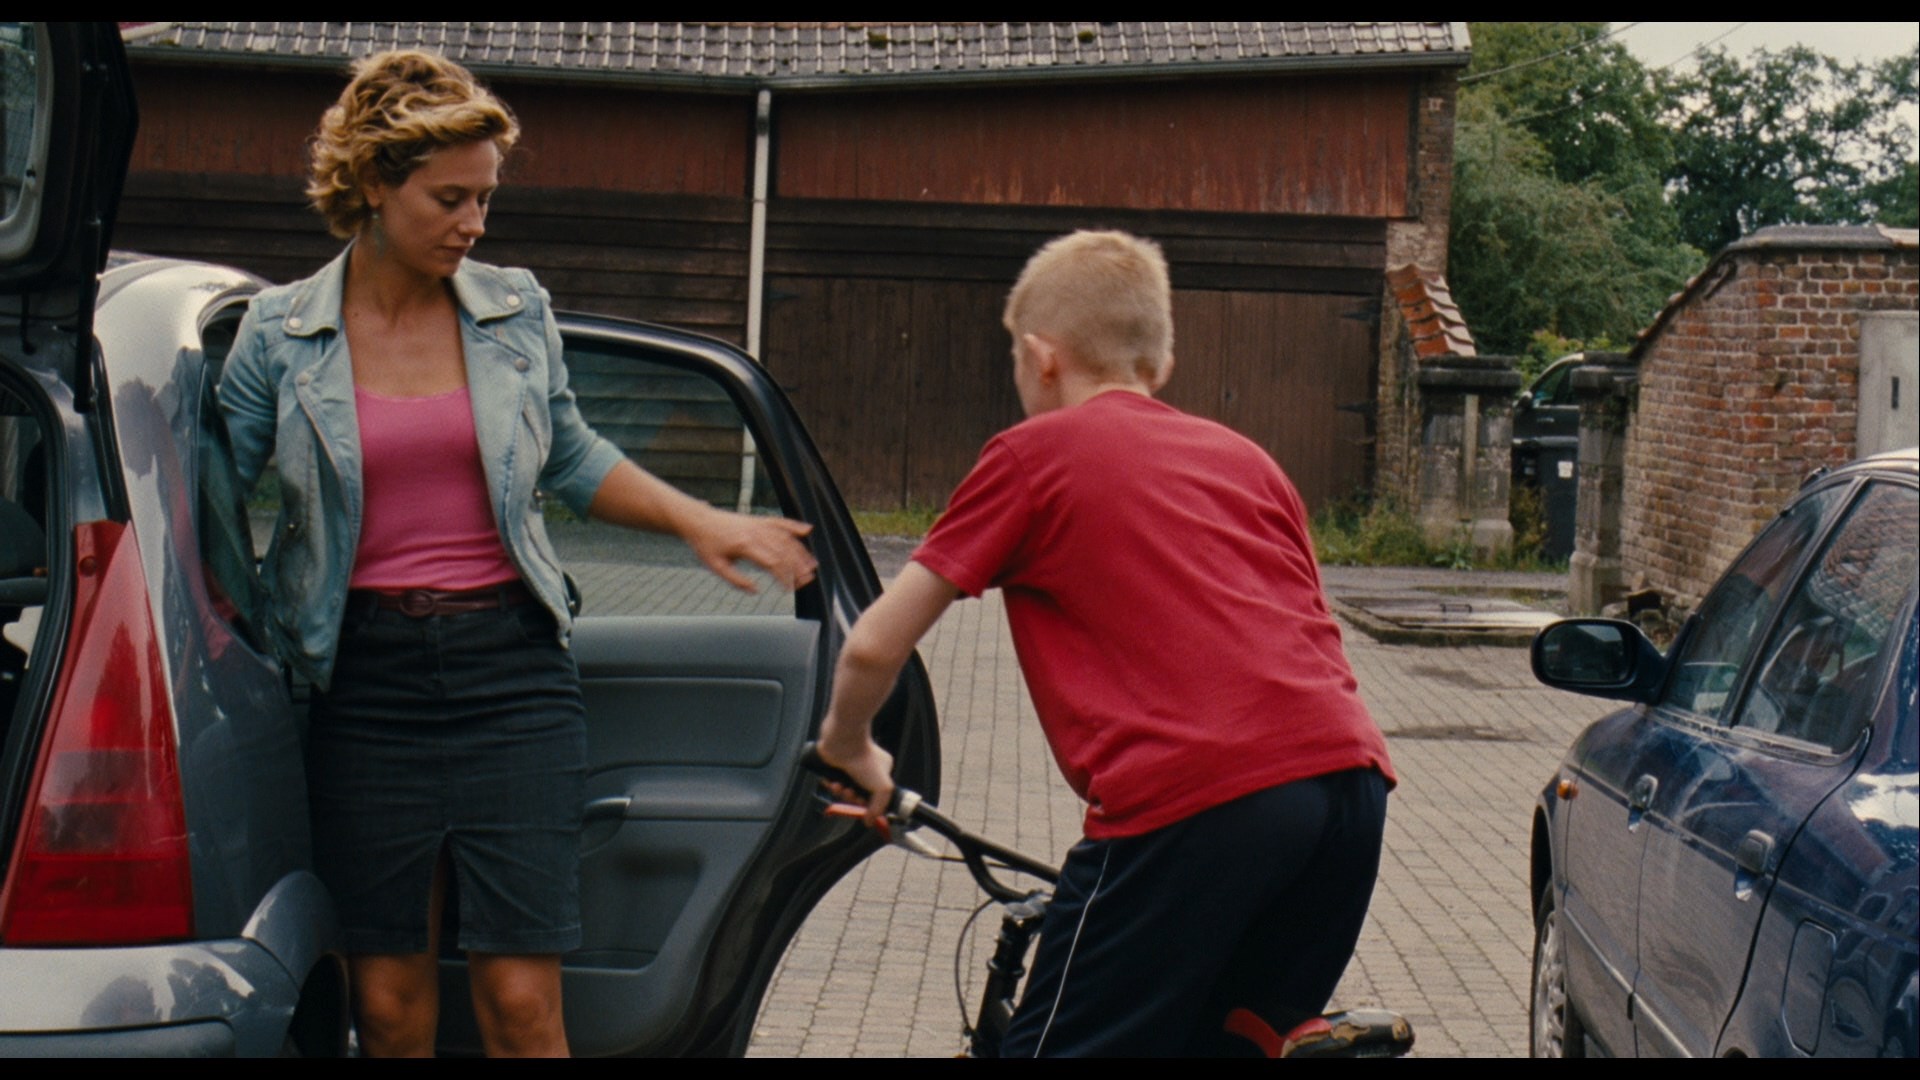 "The Kid with a Bike" (2011)